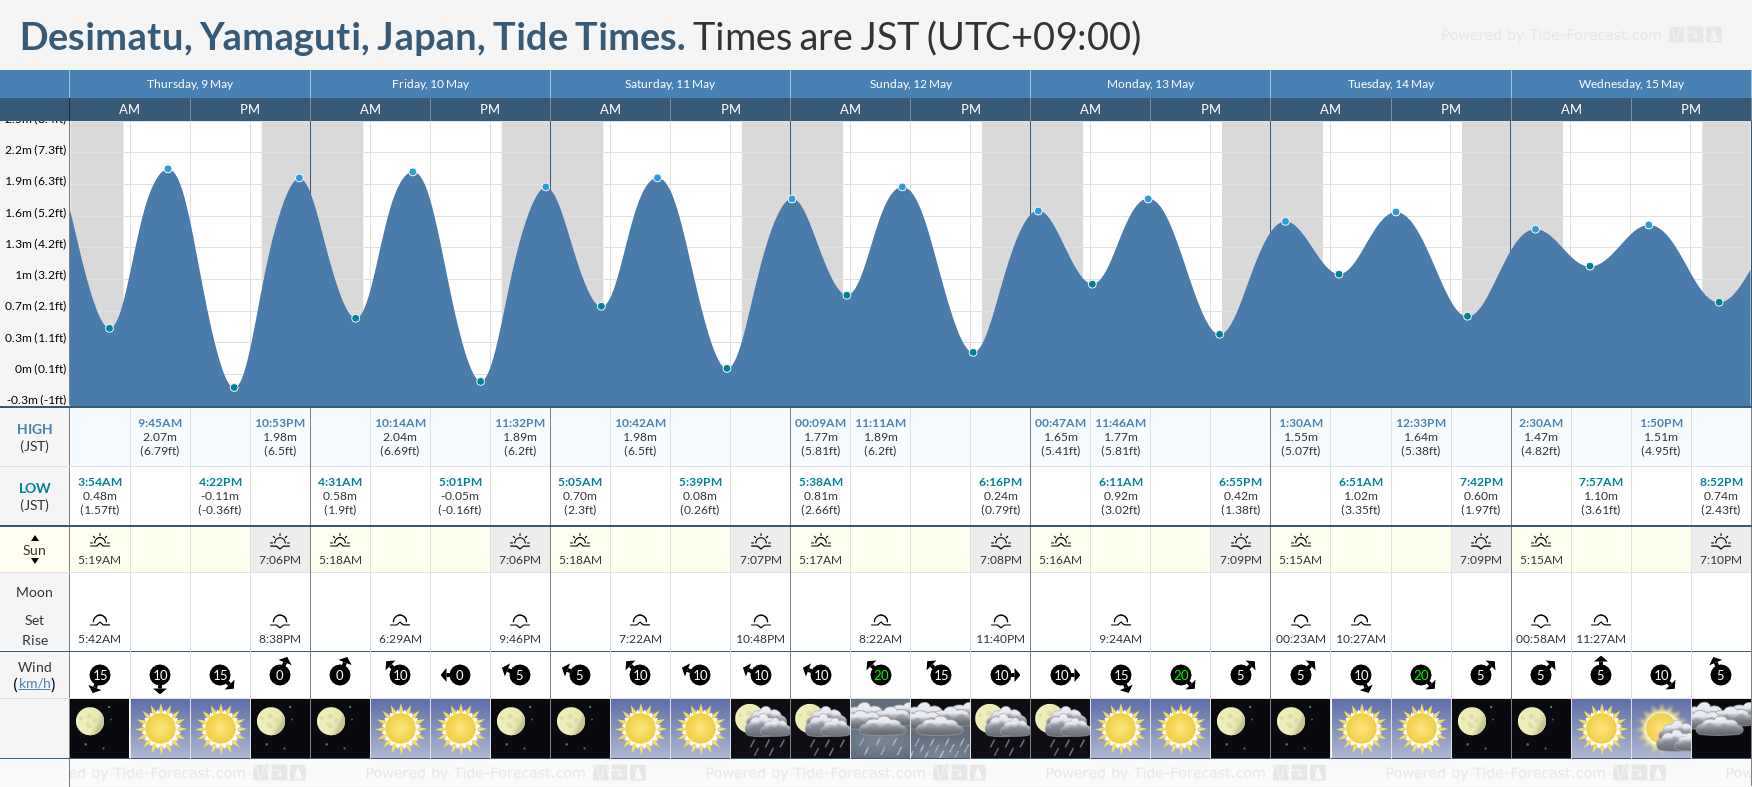 Desimatu, Yamaguti, Japan Tide Chart including high and low tide tide times for the next 7 days